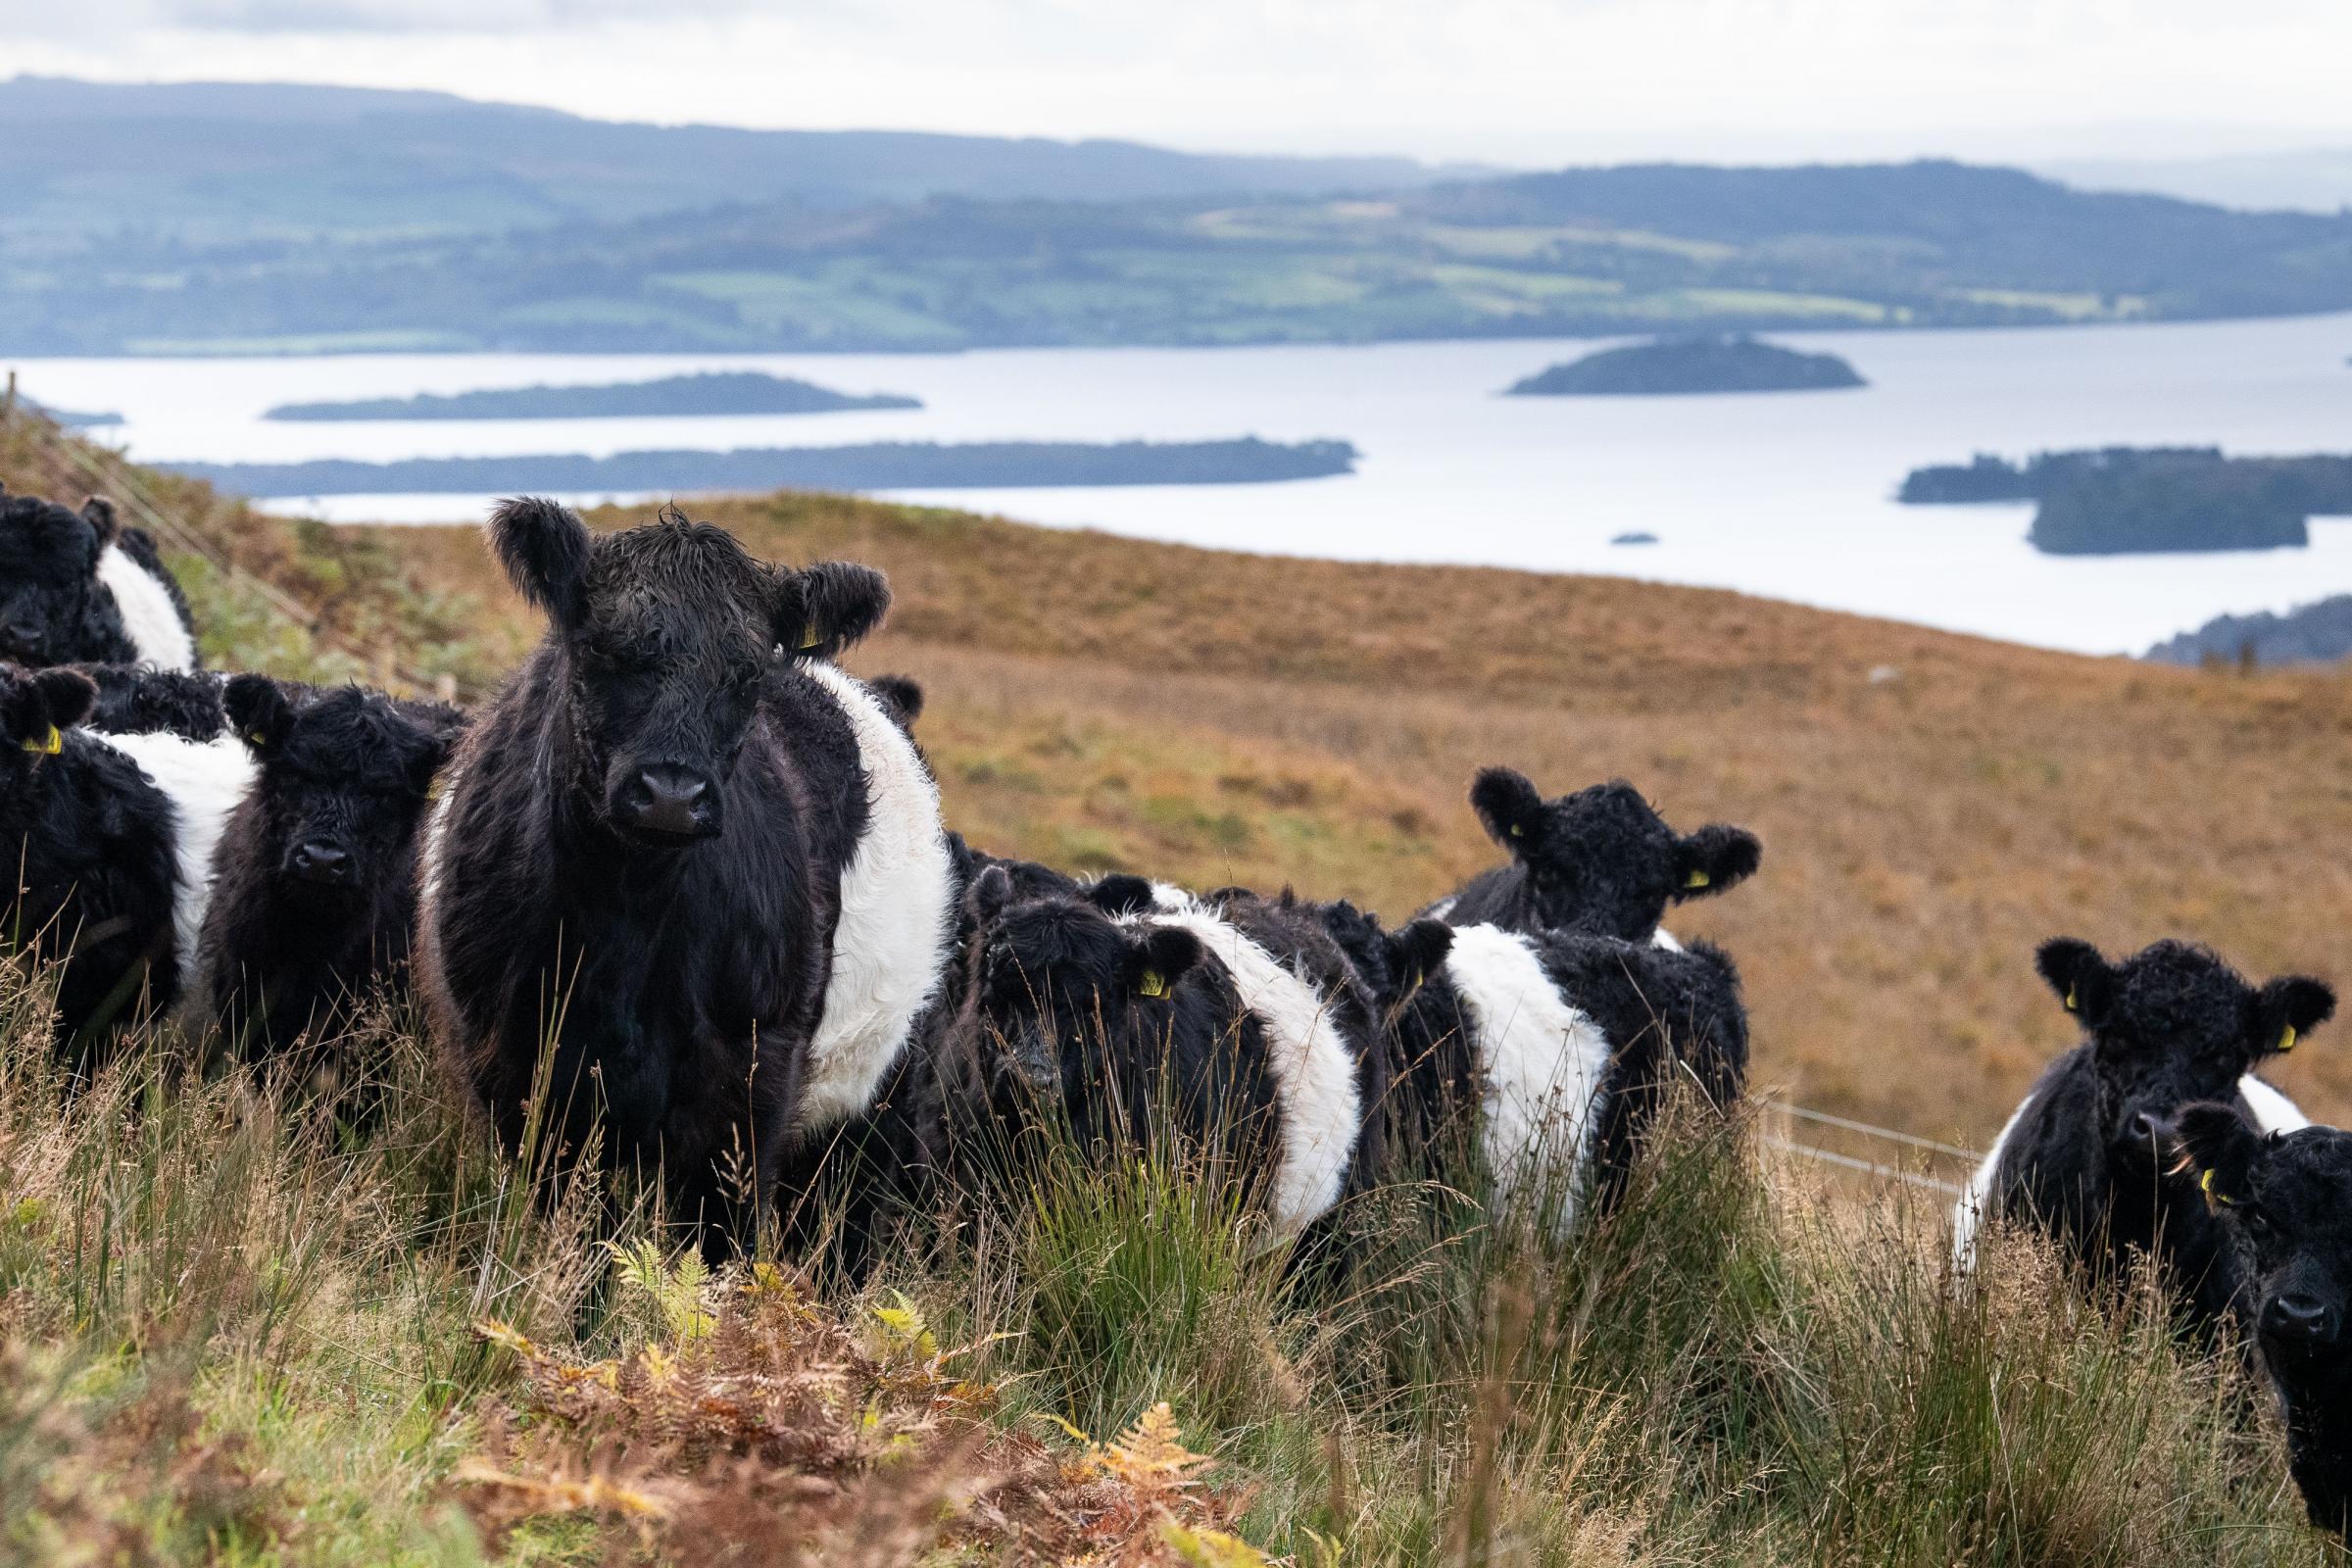 Eating meat benefits both public health and Scotland's rural life